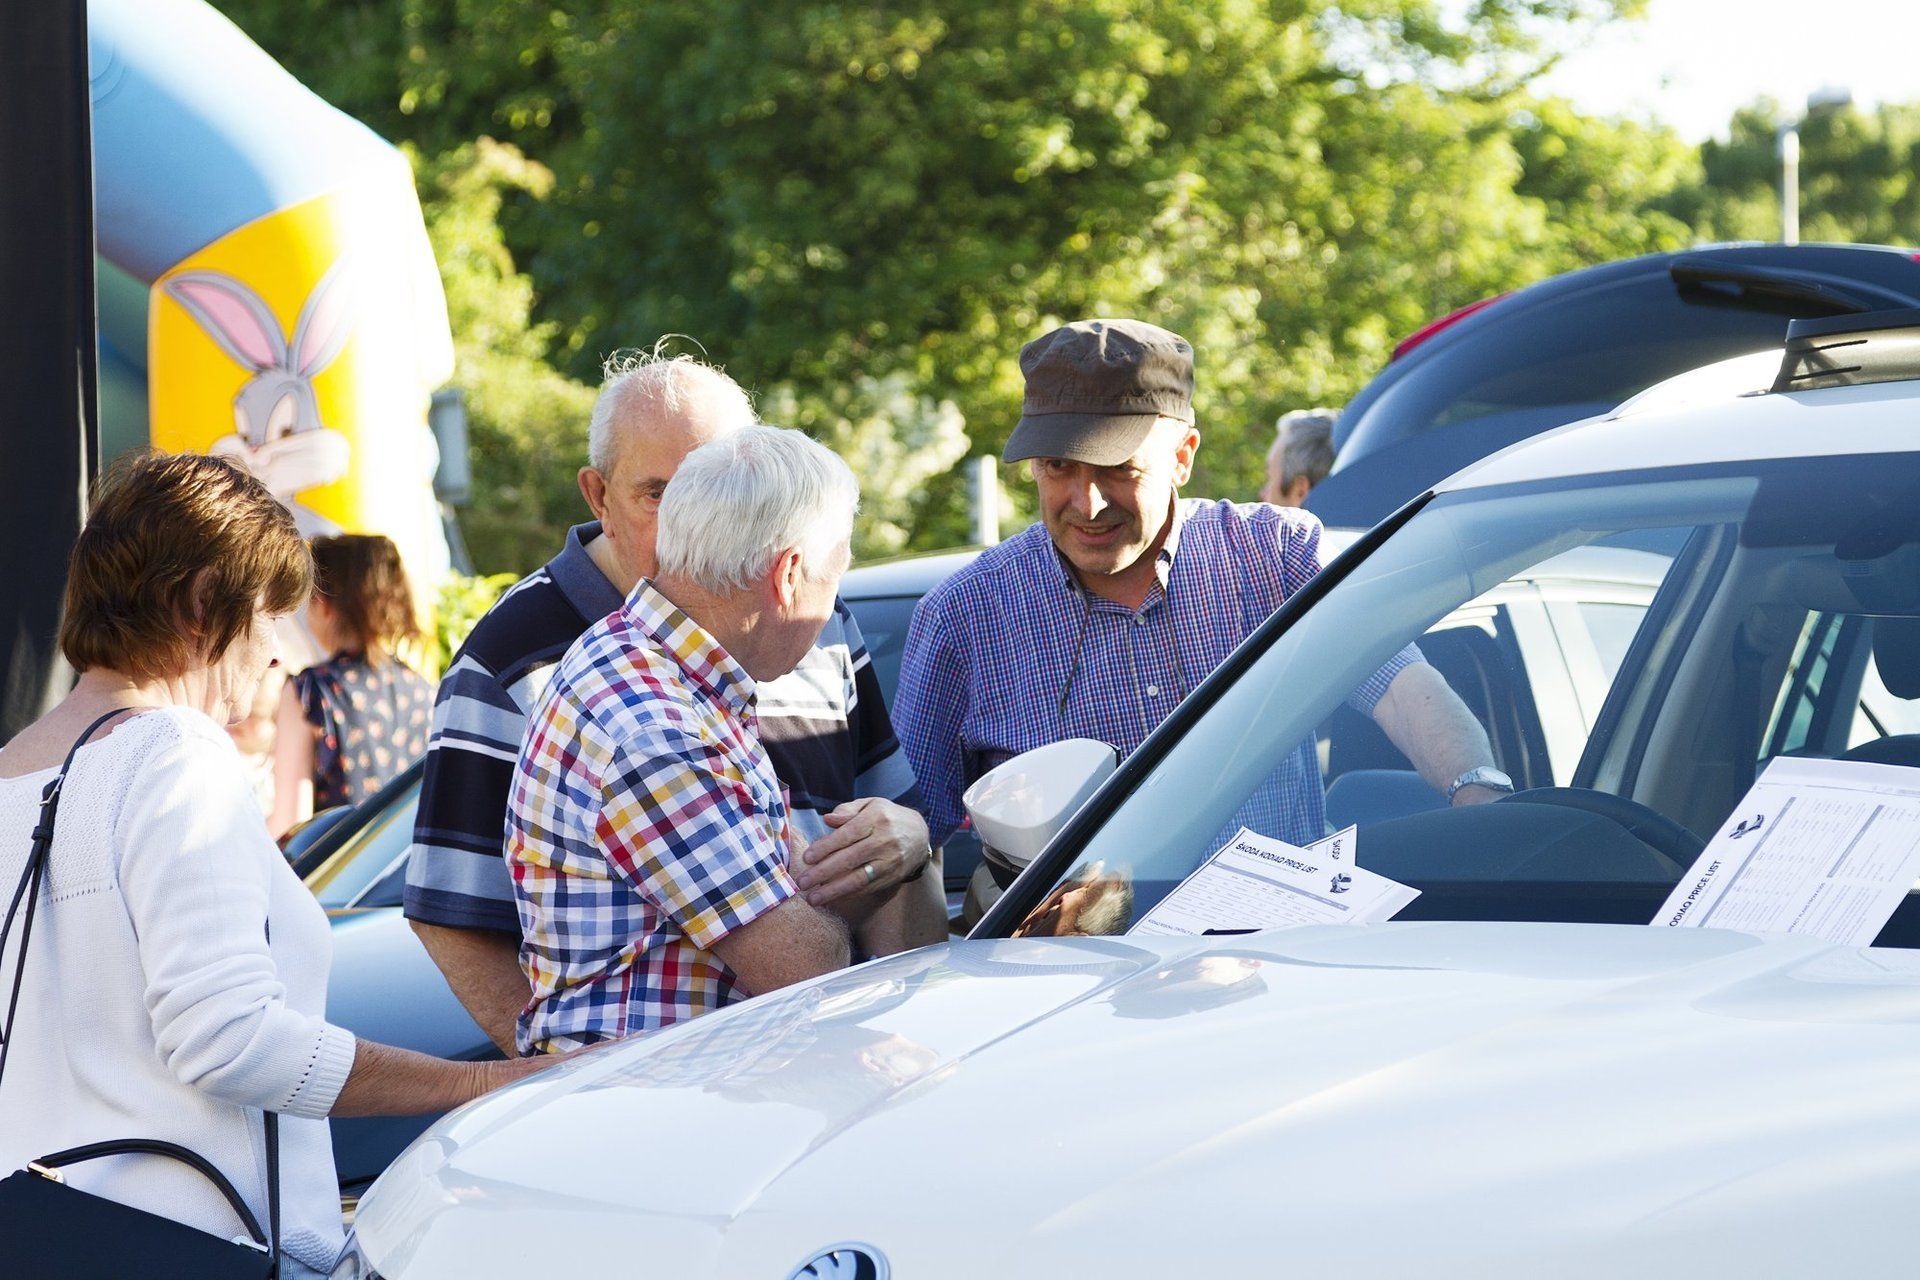 A group of people are looking at a car at a car show.